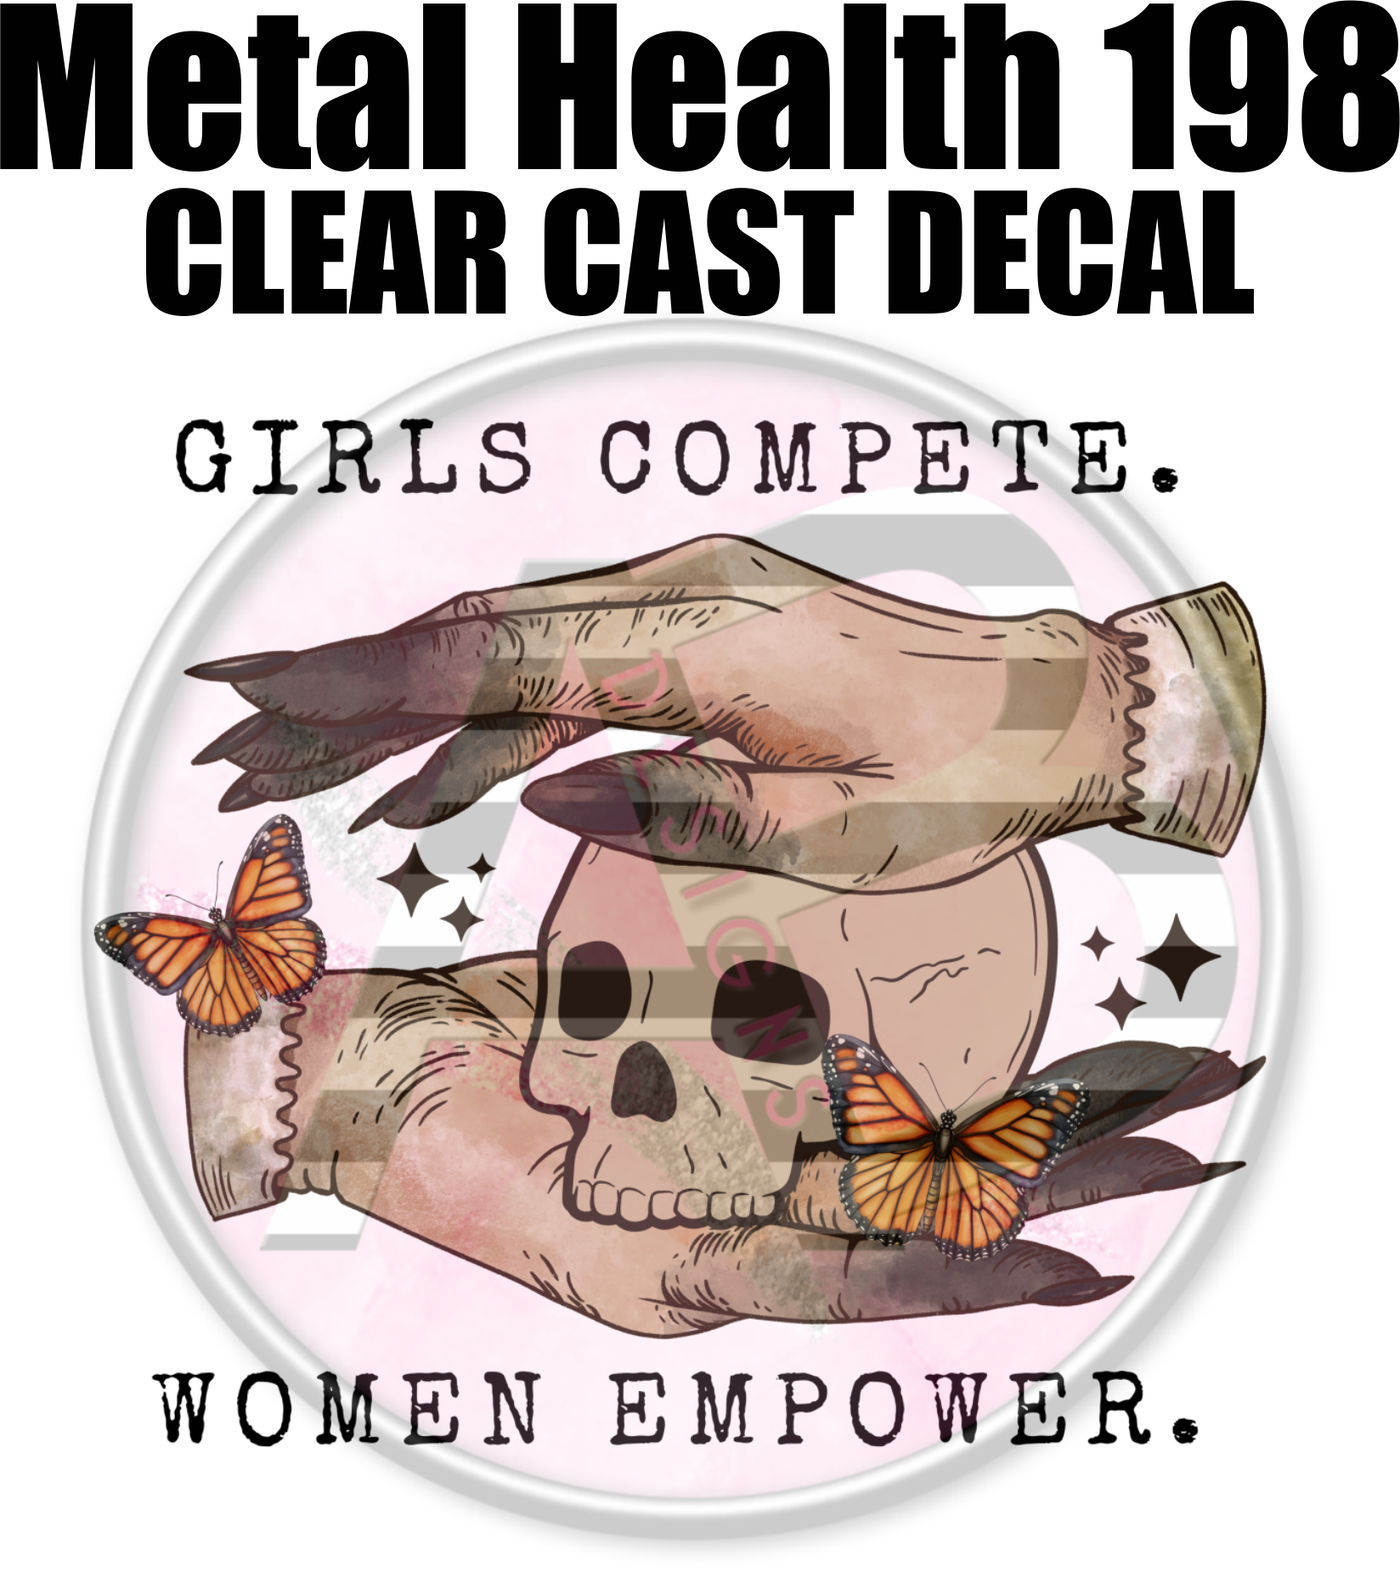 Mental Health 98 - Clear Cast Decal-567